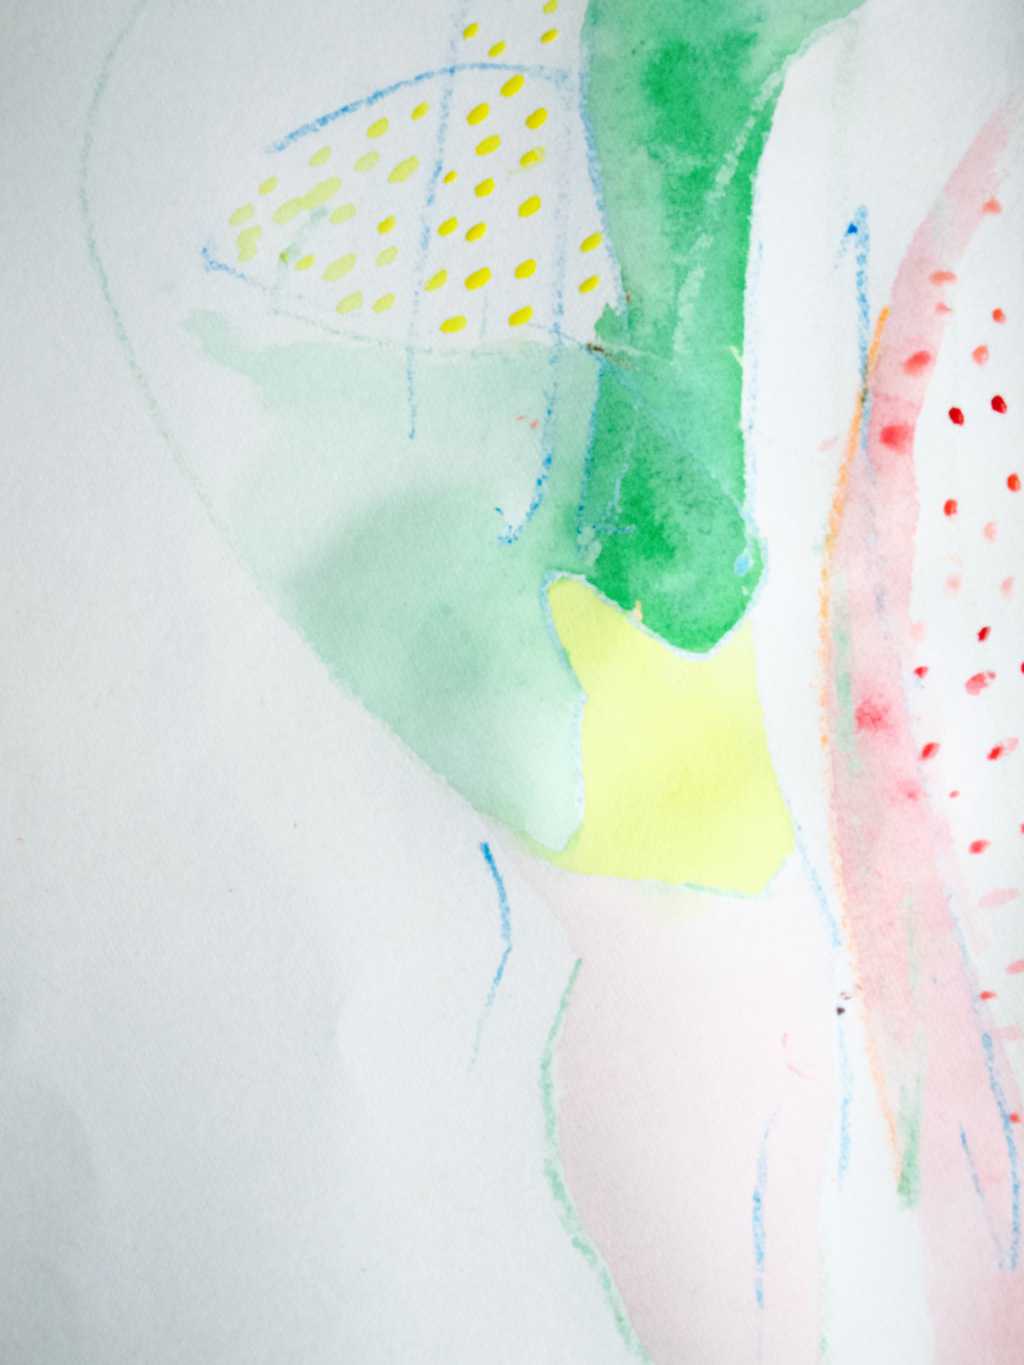 Toddler doodles turned into abstract art